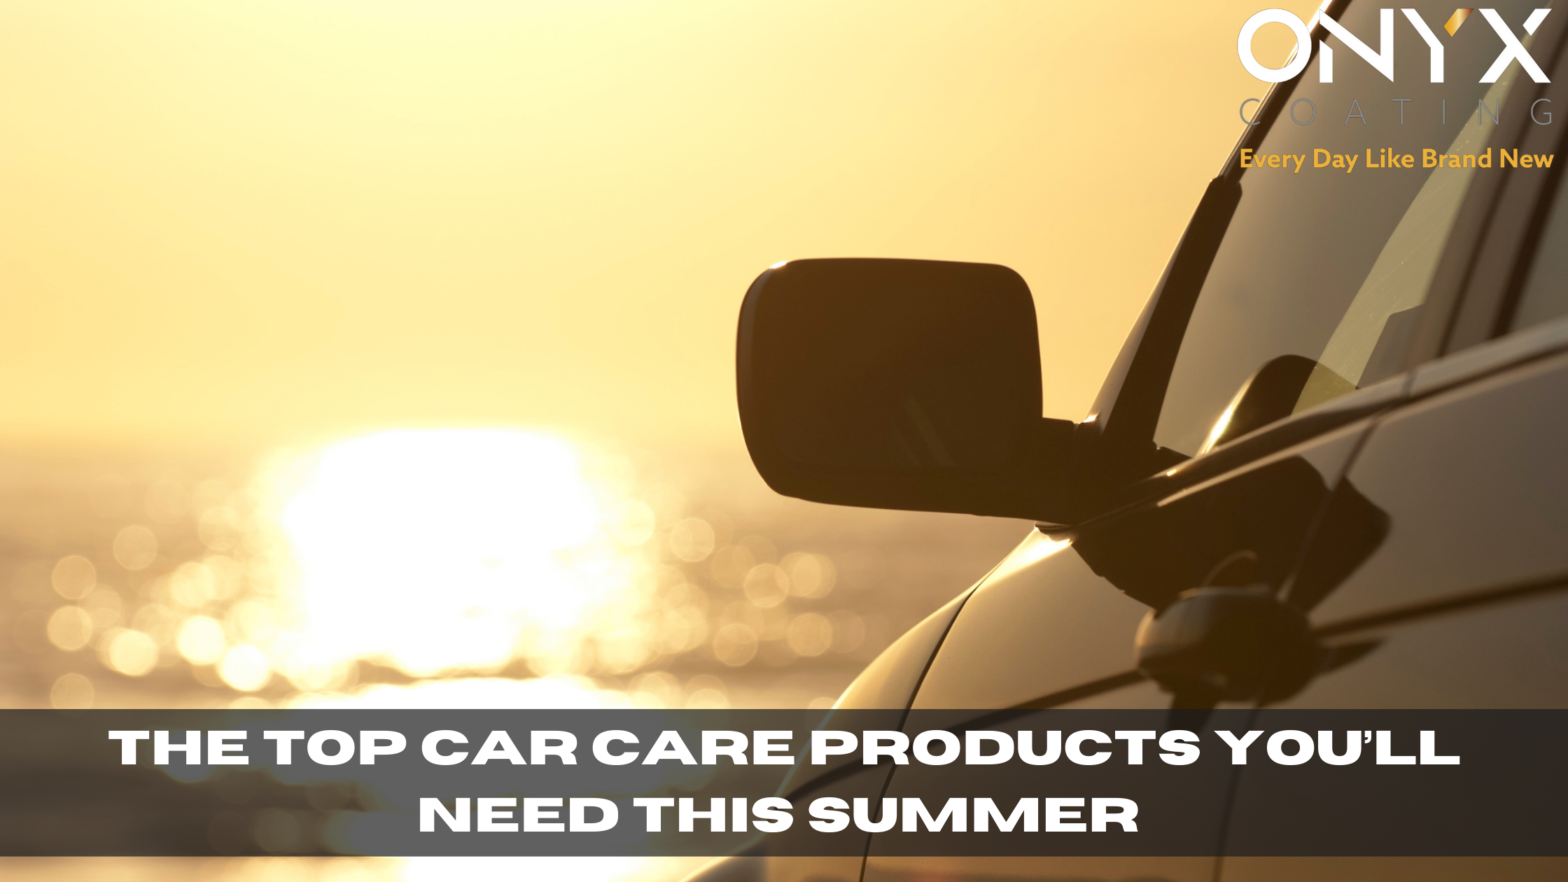 The top car care products you’ll need this summer